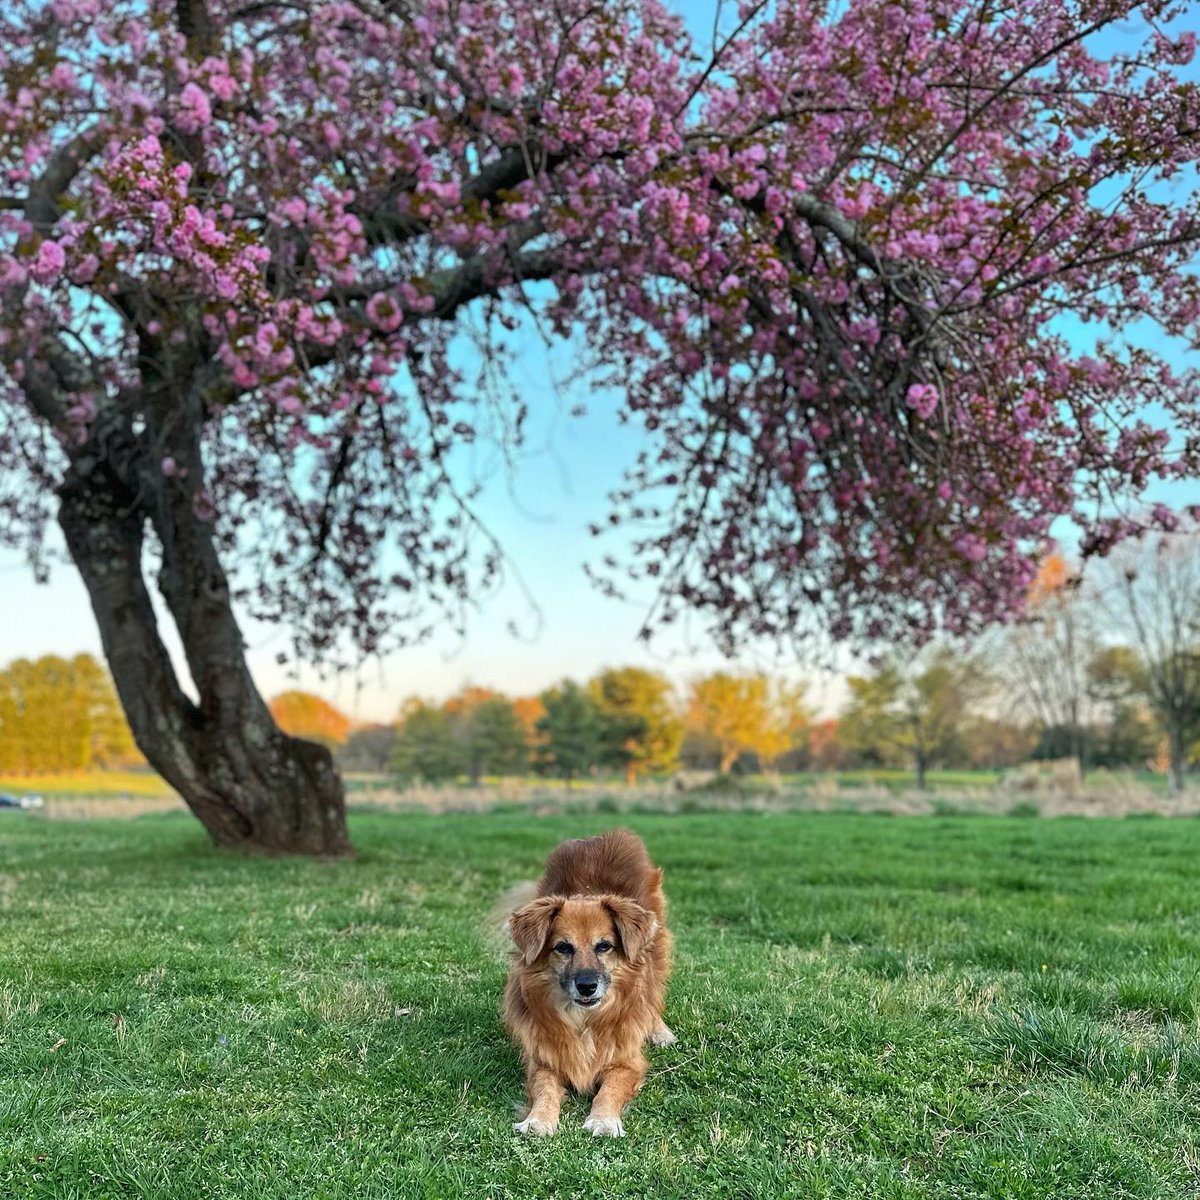 Hello Spring, Loudoun is blooming with joy! Let the sunshine in and the adventures begin ☀️💐 #LoveLoudoun Check out our new blog where we highlight all the fun events happening in Loudoun this spring: bit.ly/41eYWeK 📸: hayleys_zen_moments (IG)